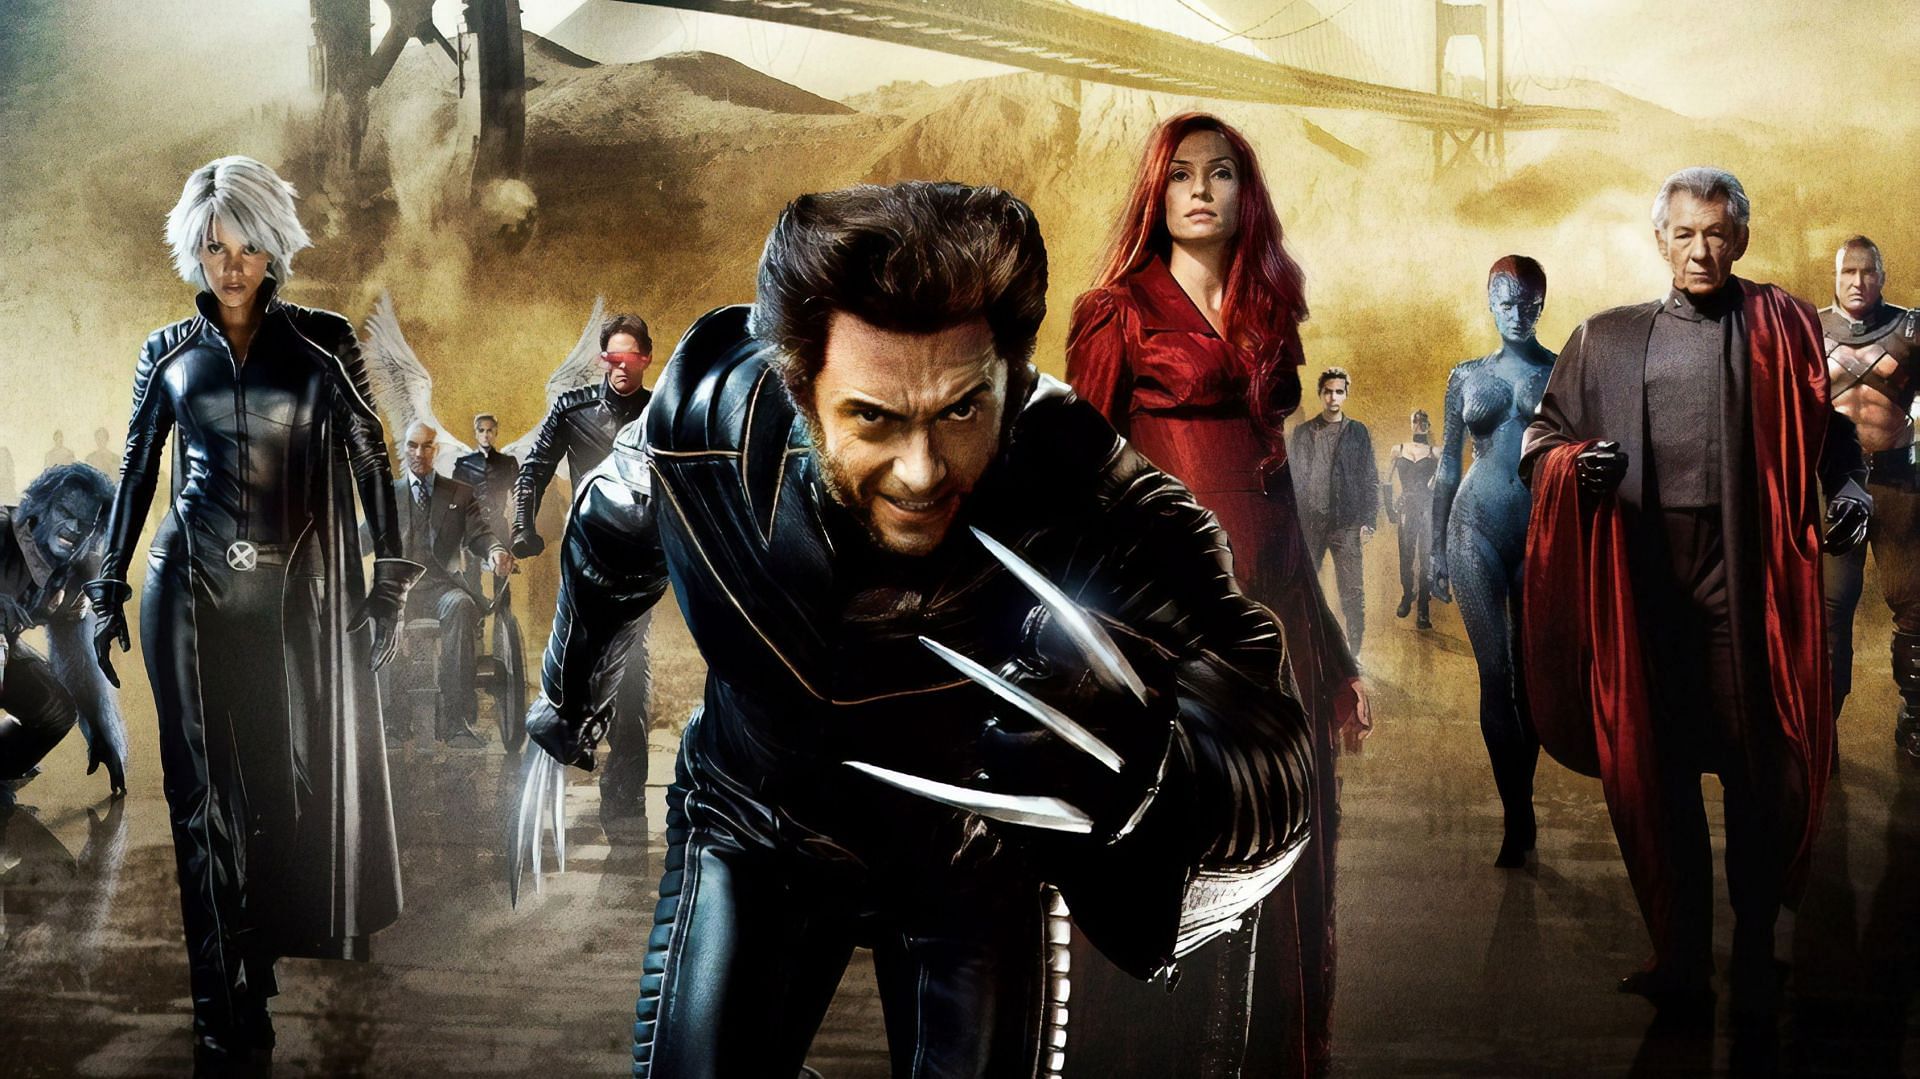 The X-Men are a group of superheroes with amazing powers because of their genetic mutations. (Image via Marvel)